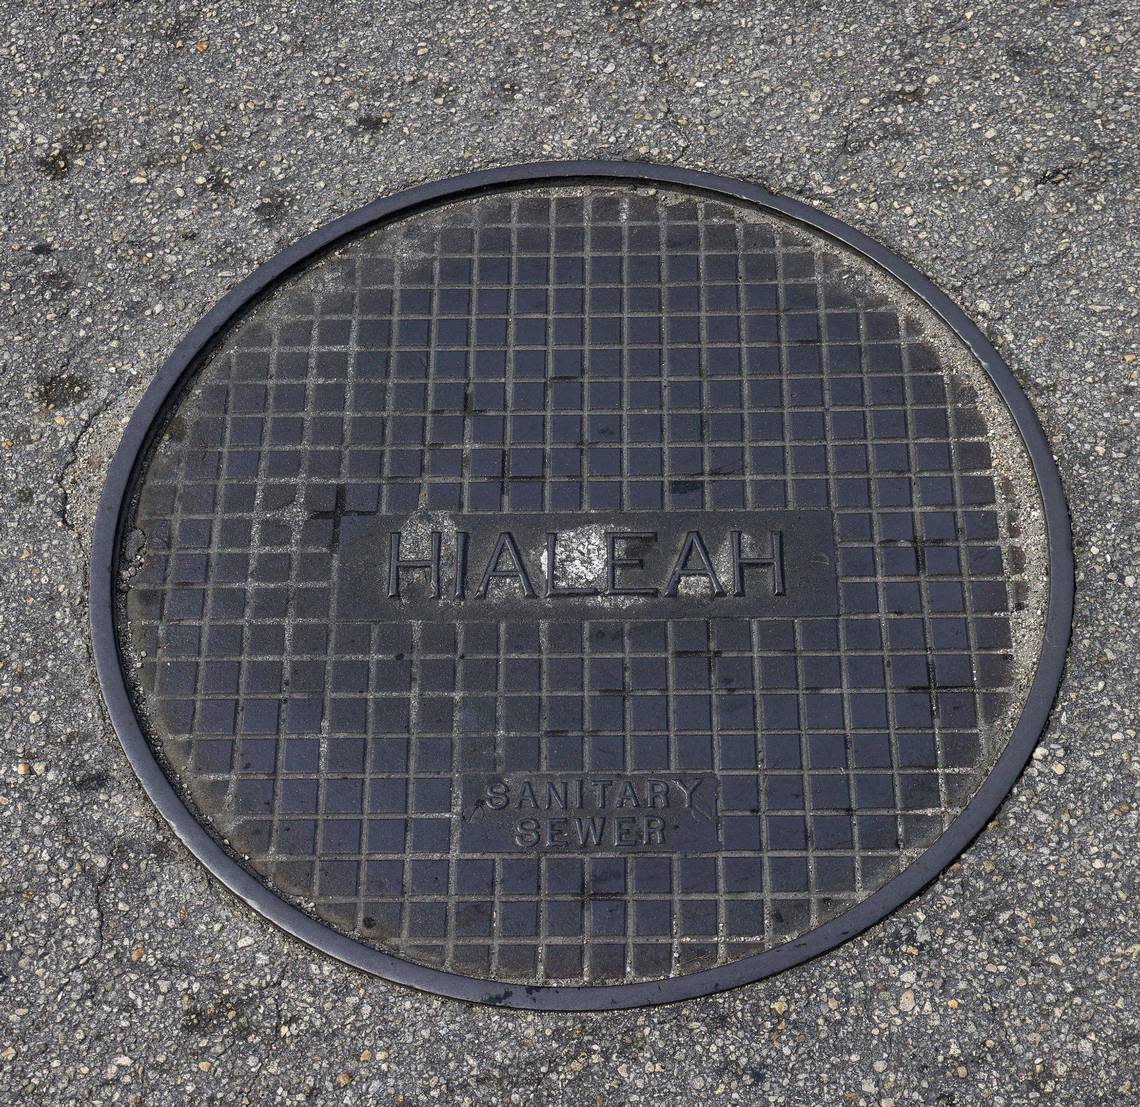 Sewage and water services in the area has street covers from the City of Hialeah.